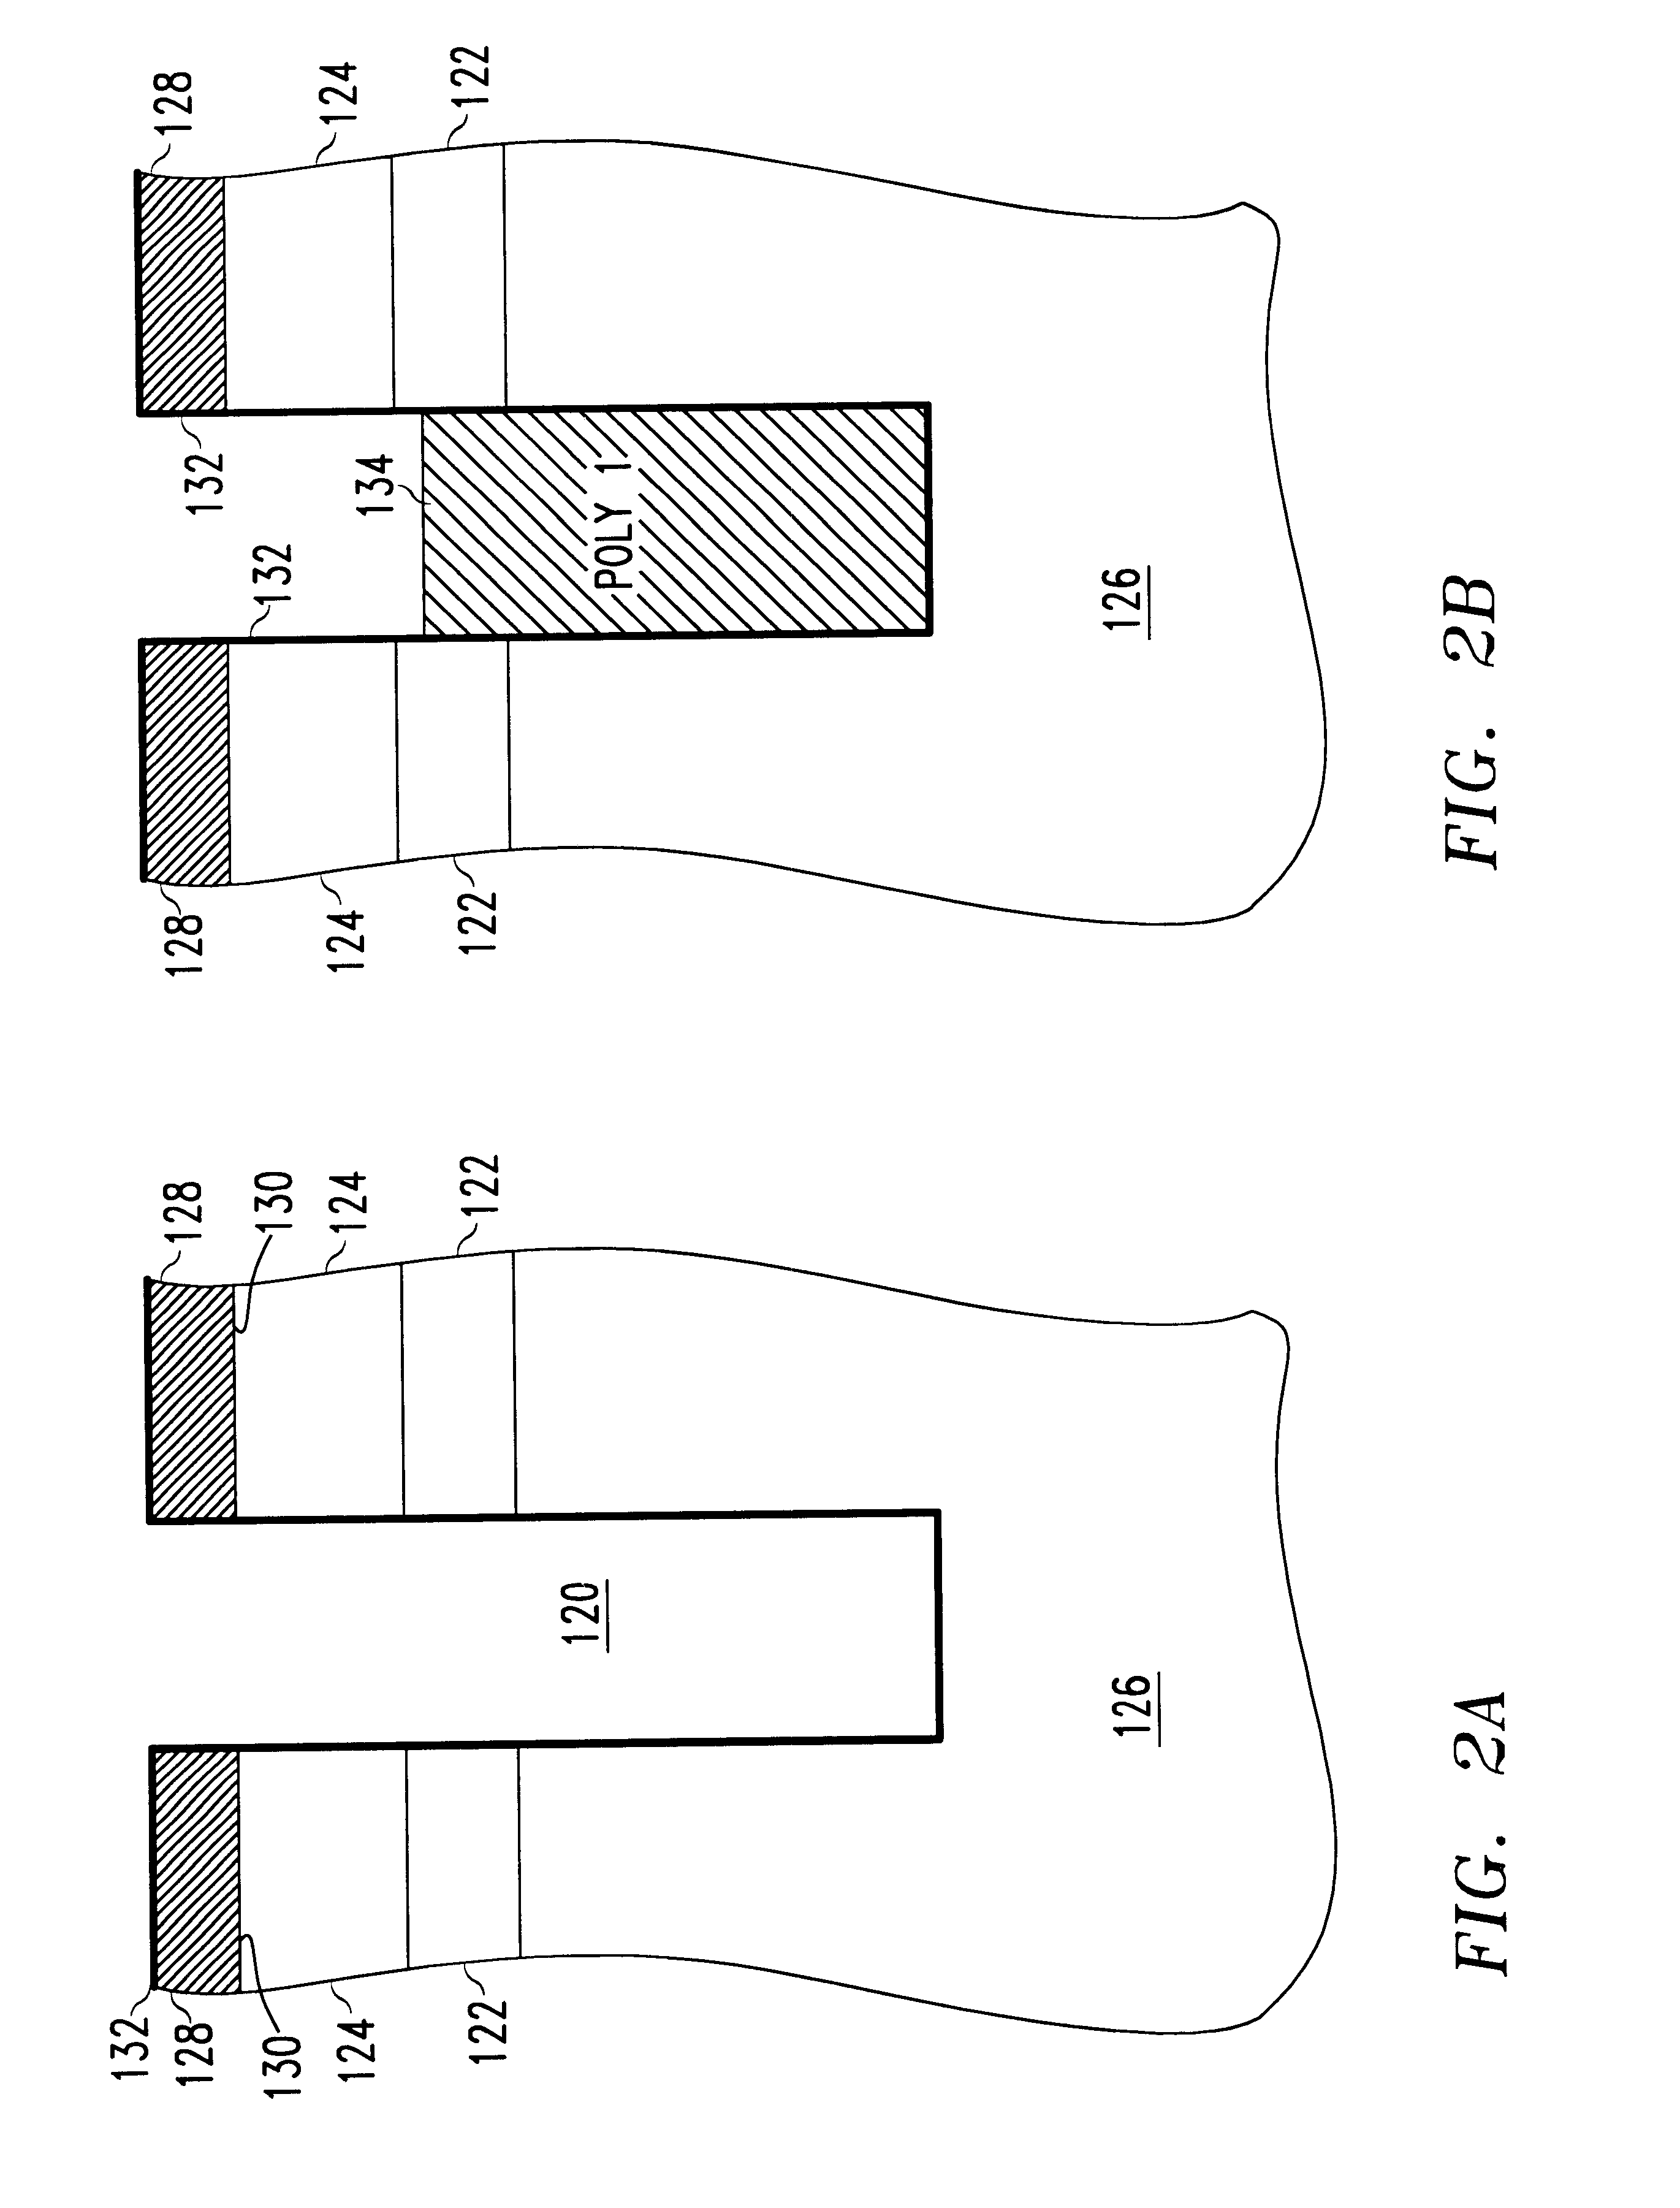 Silicon-on-insulator vertical array DRAM cell with self-aligned buried strap